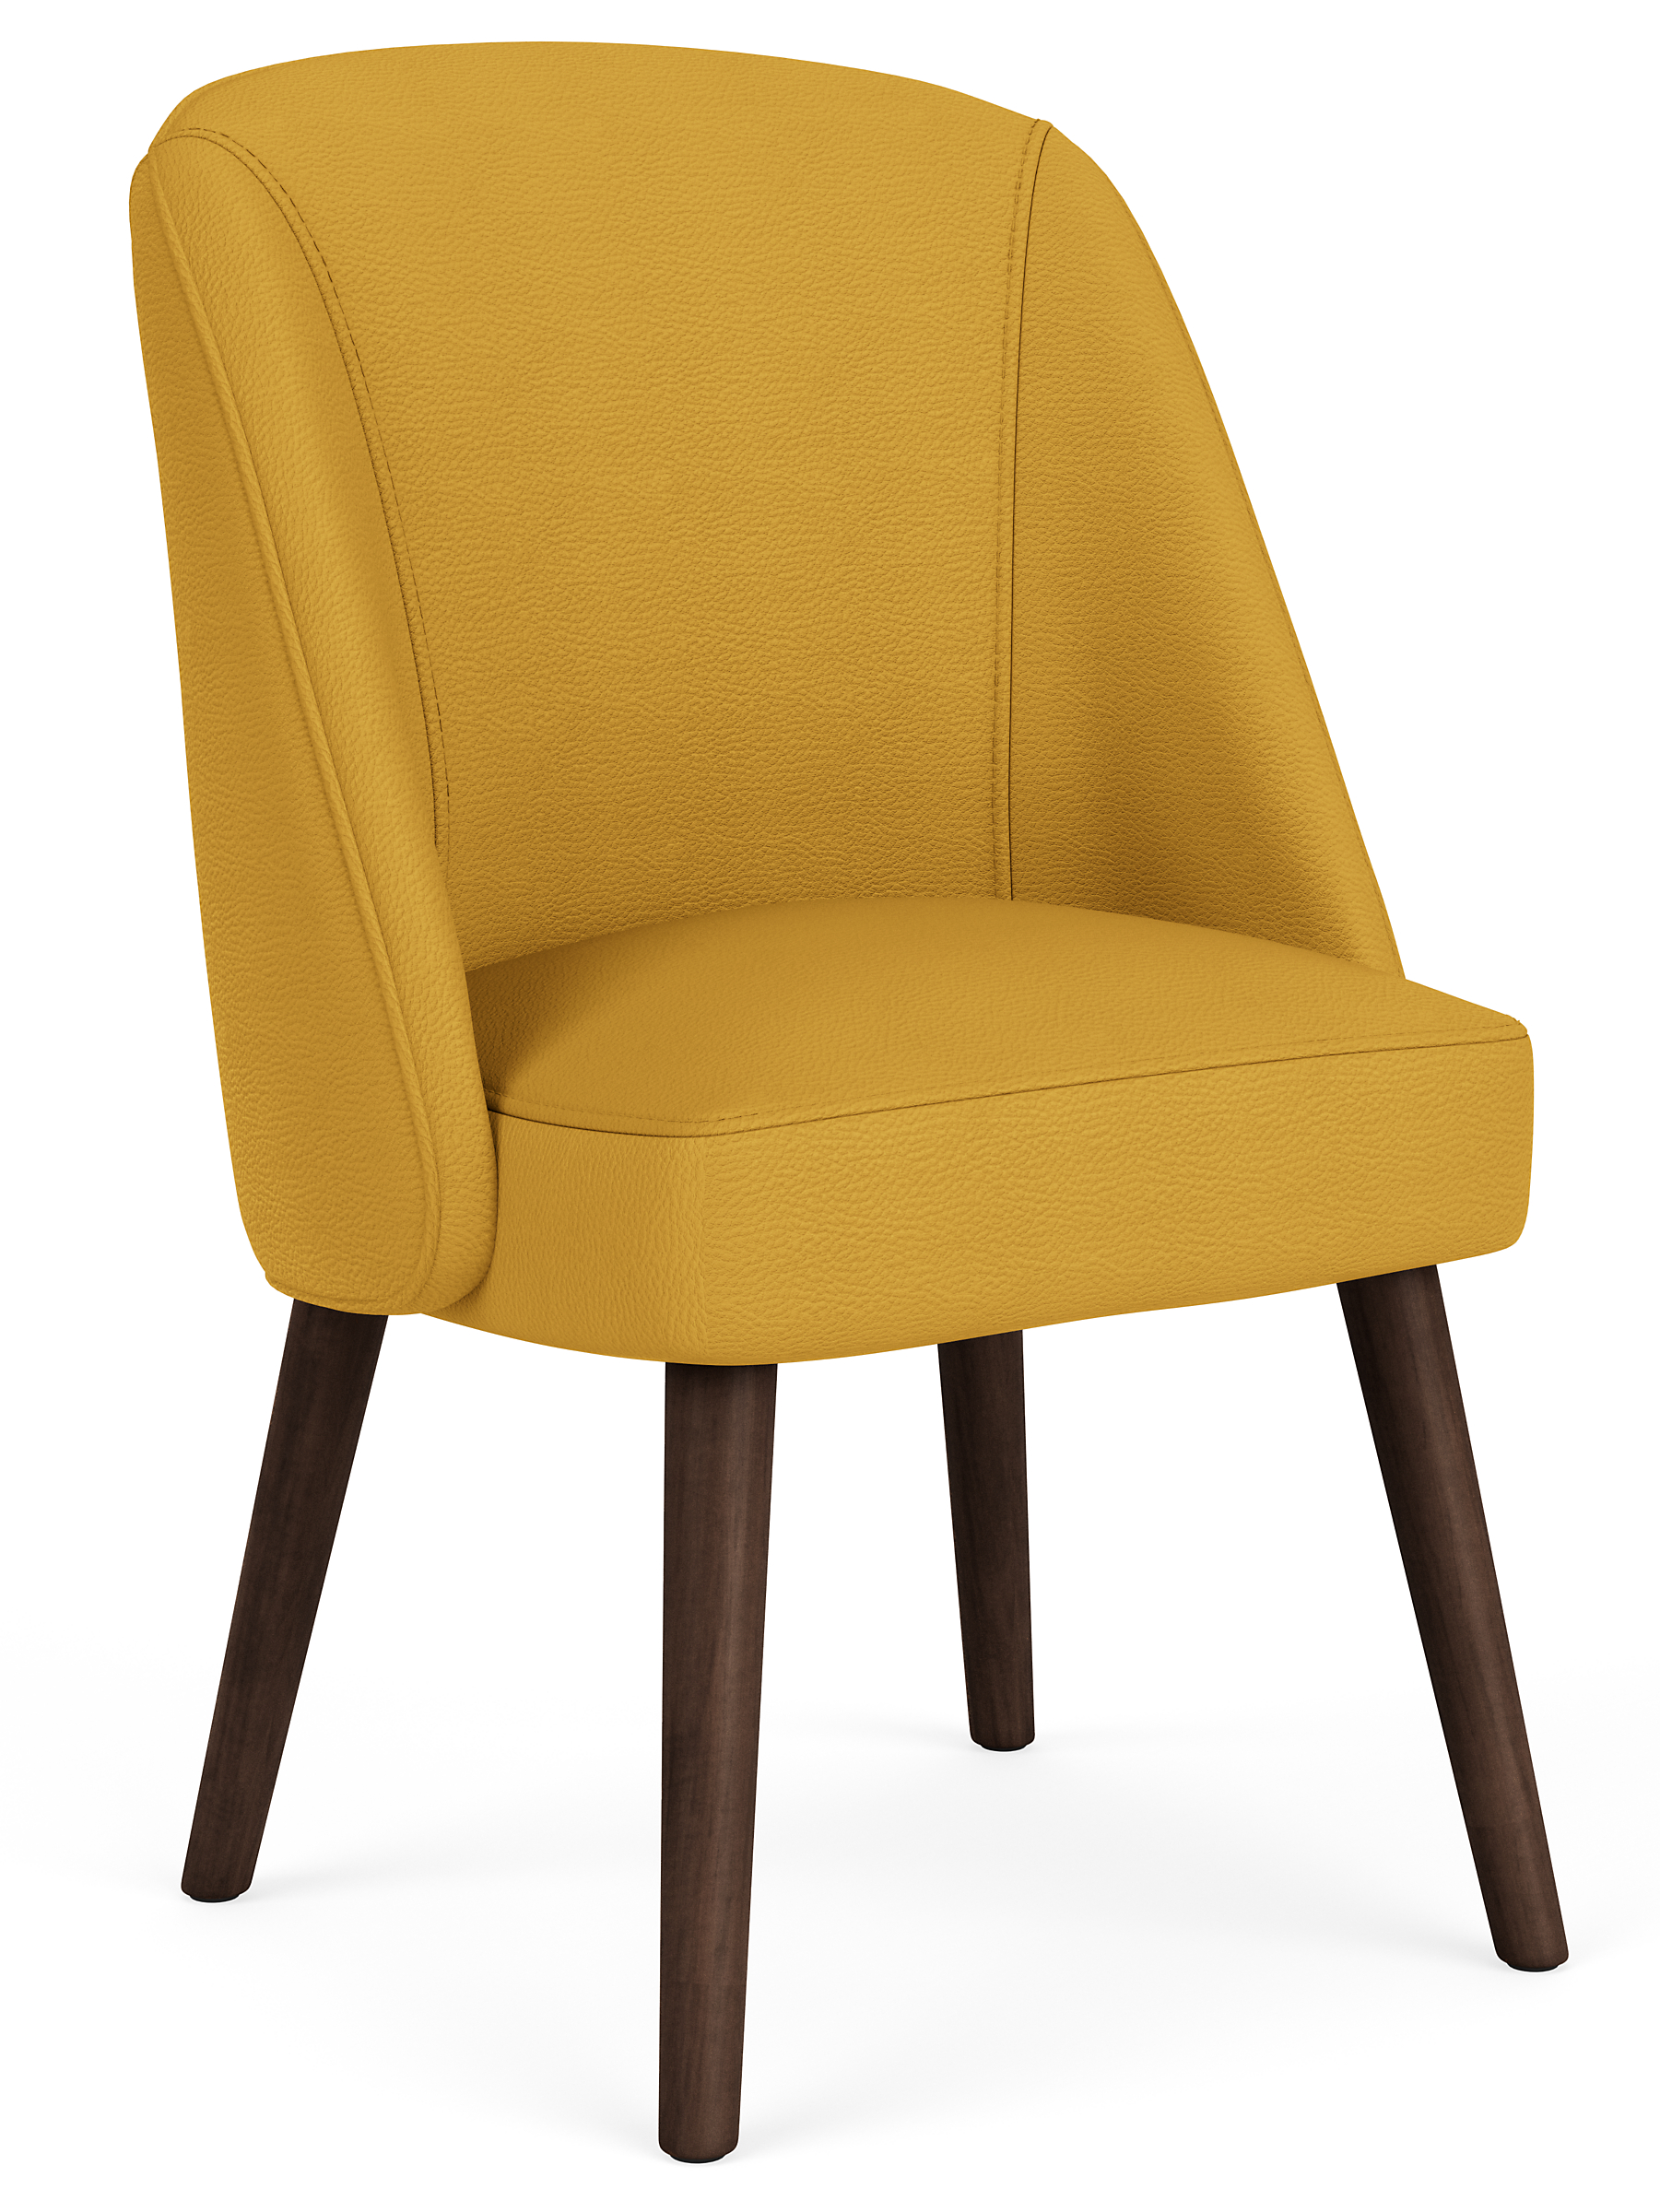 Cora Side Chair in Urbino Saffron Leather with Charcoal Legs